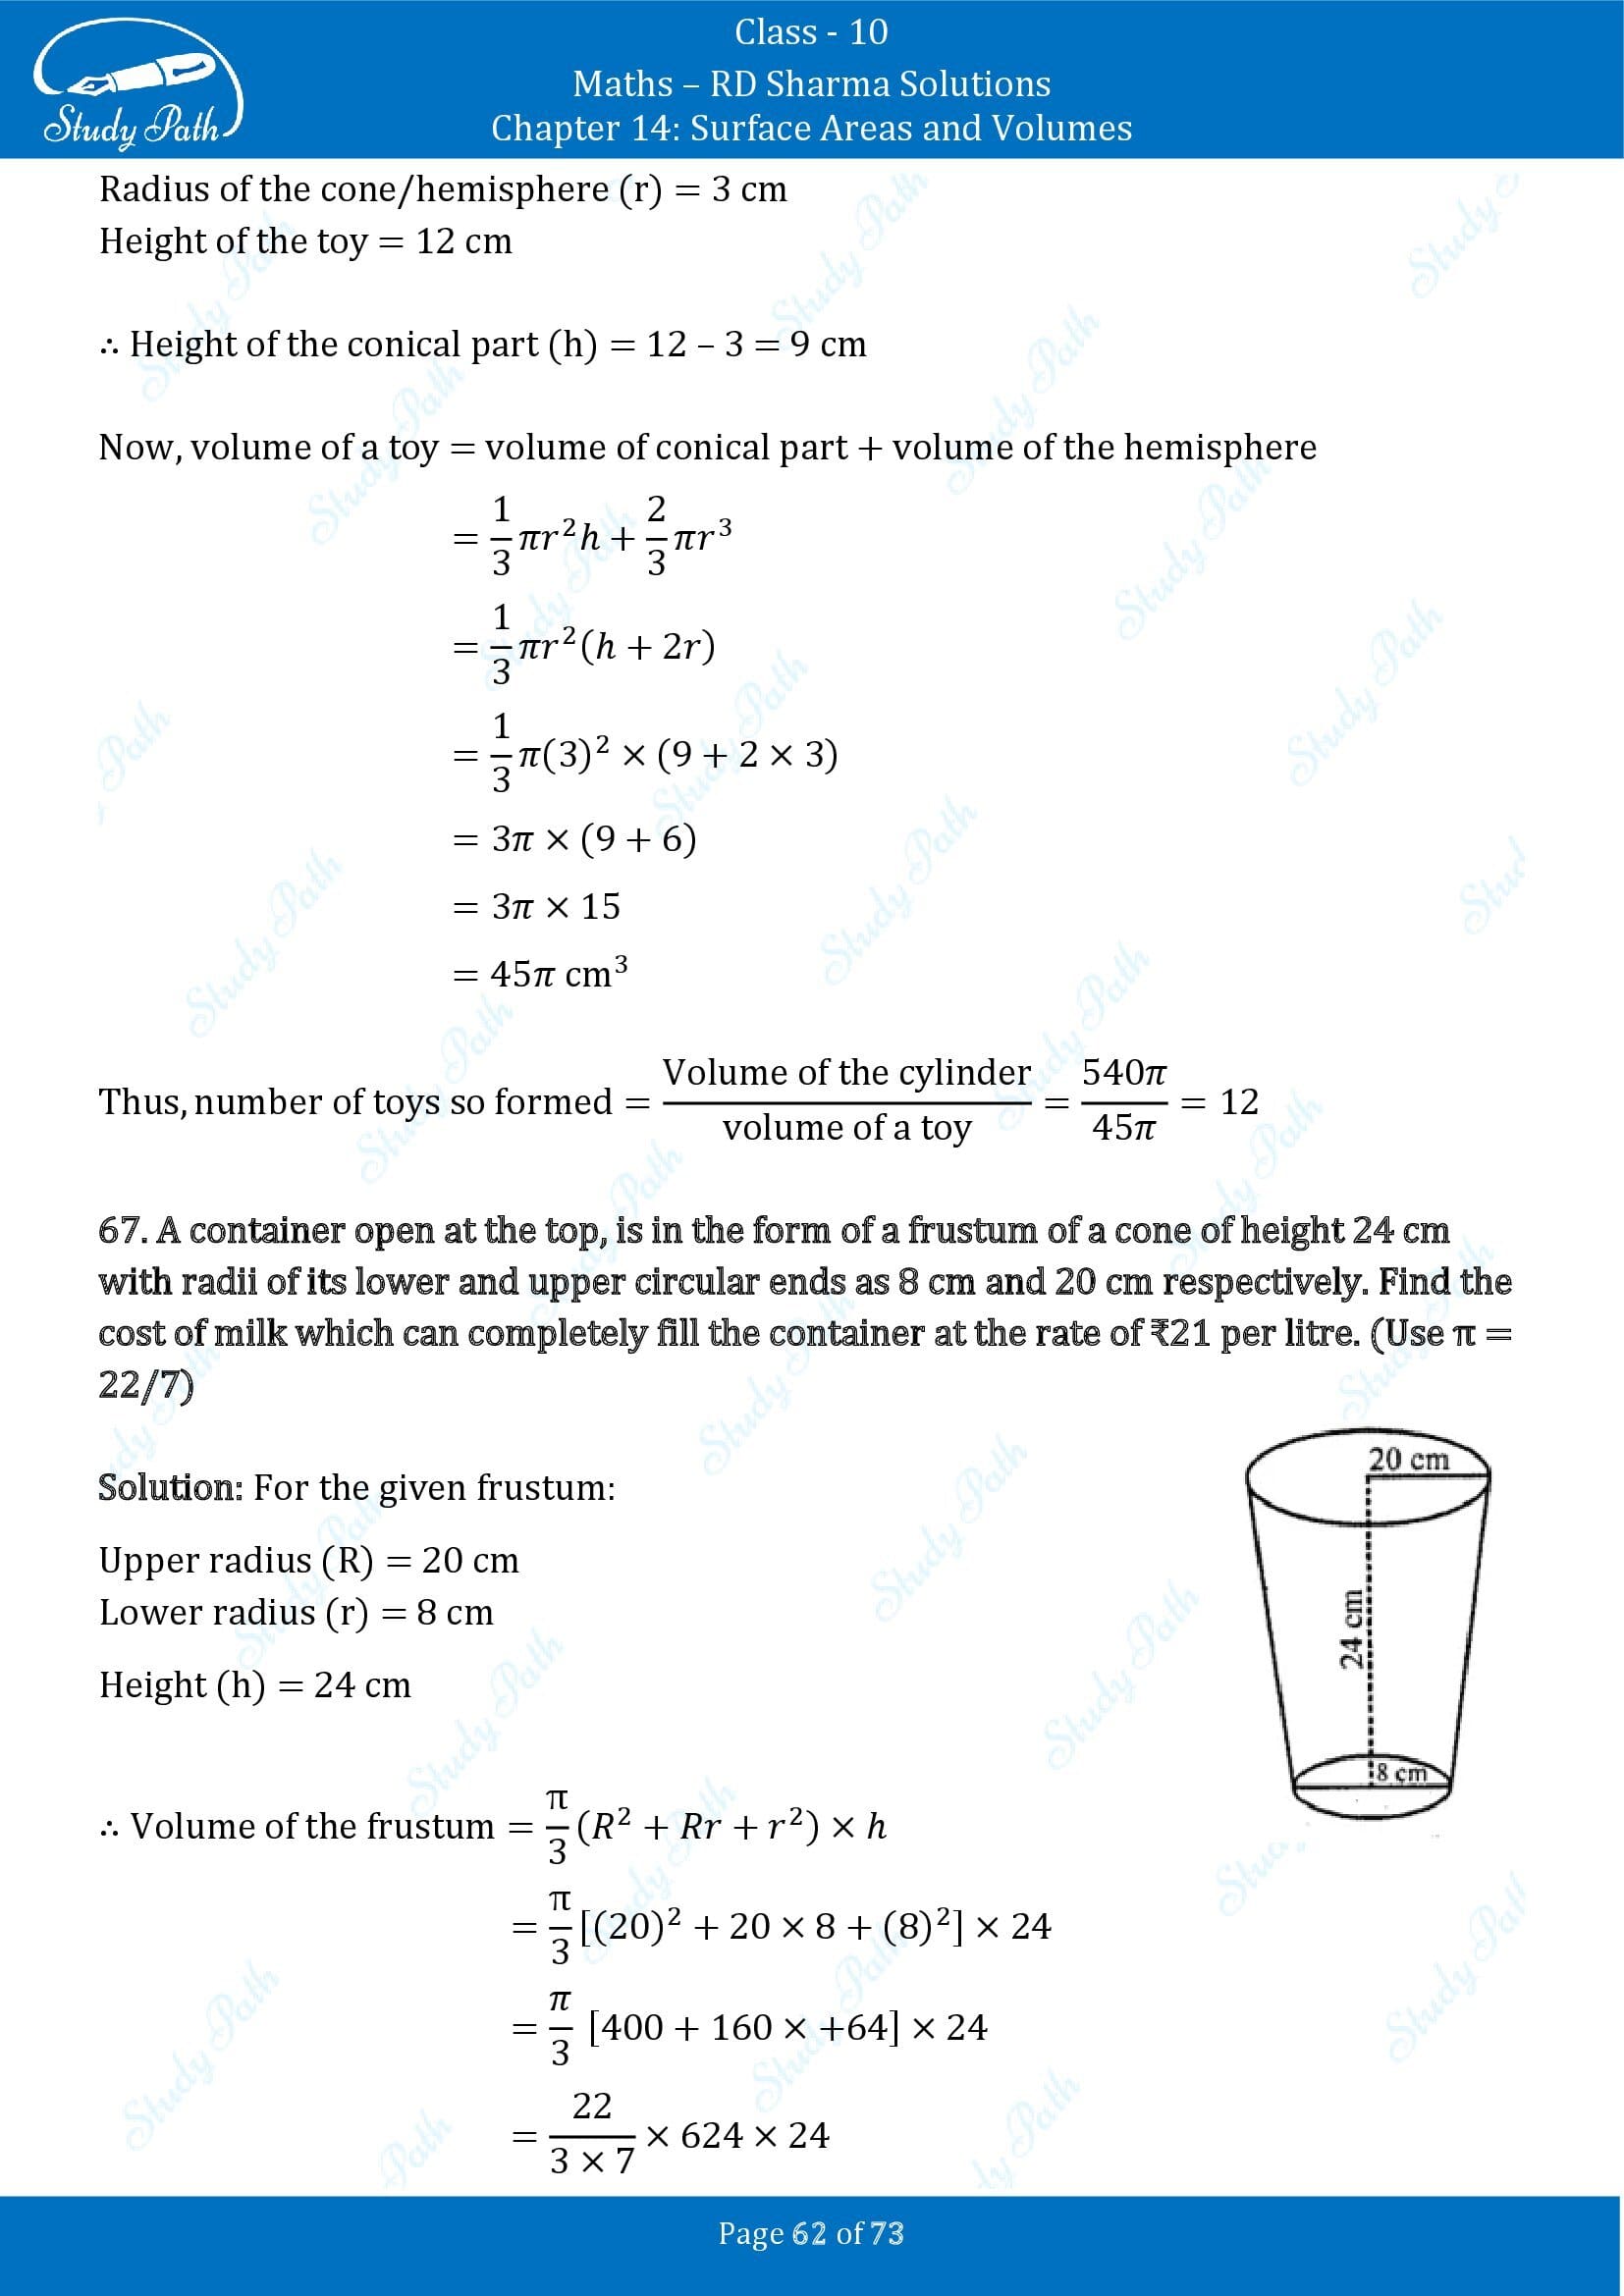 RD Sharma Solutions Class 10 Chapter 14 Surface Areas and Volumes Revision